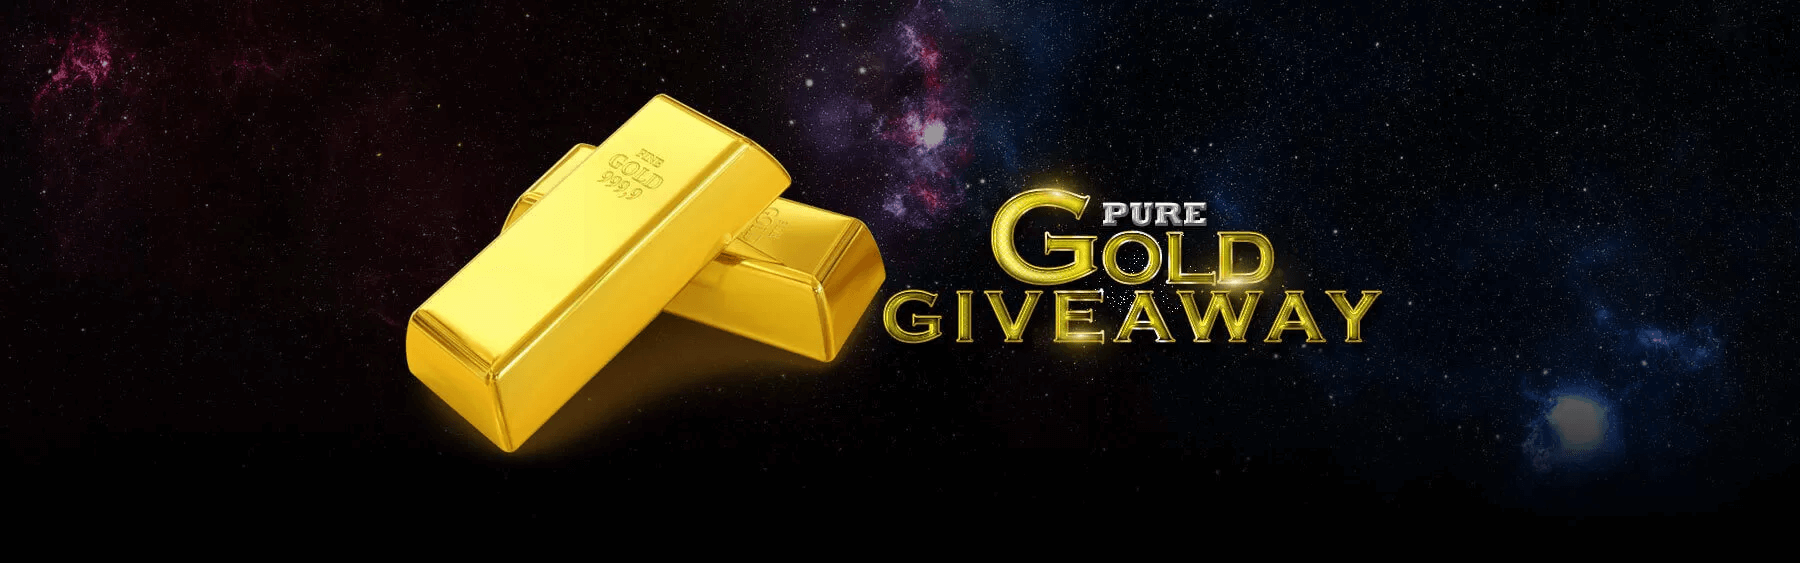 Gold Give Away